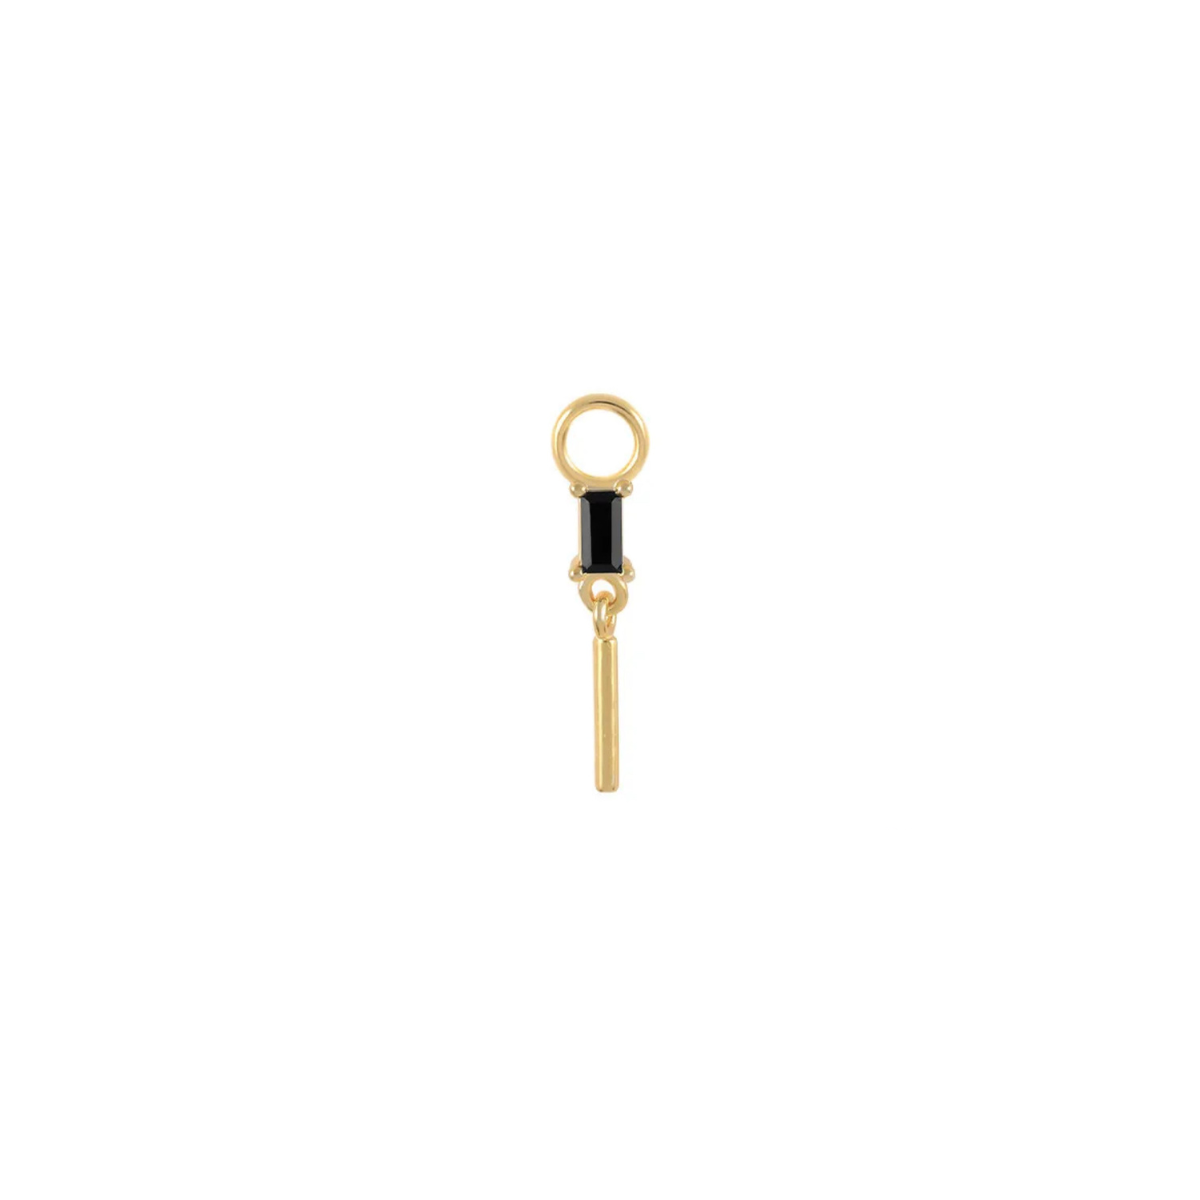 Halley 18k Gold Plated Earring Charm